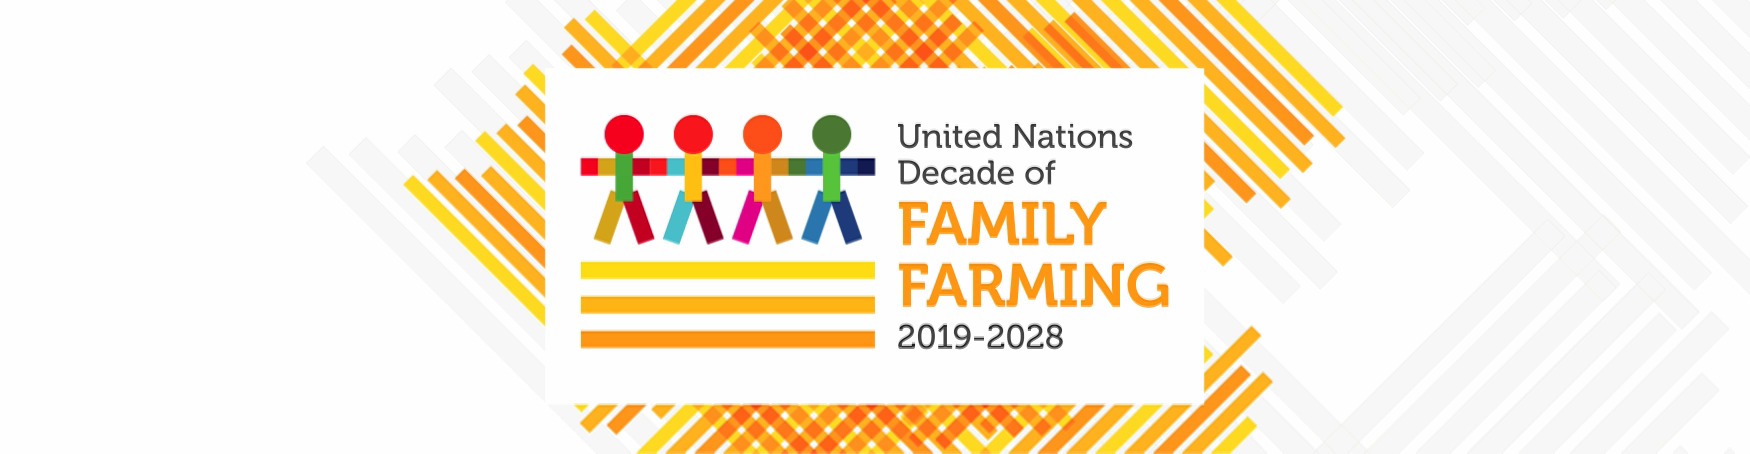 Imagen de The United Nations and Family Farming (2019-2028)